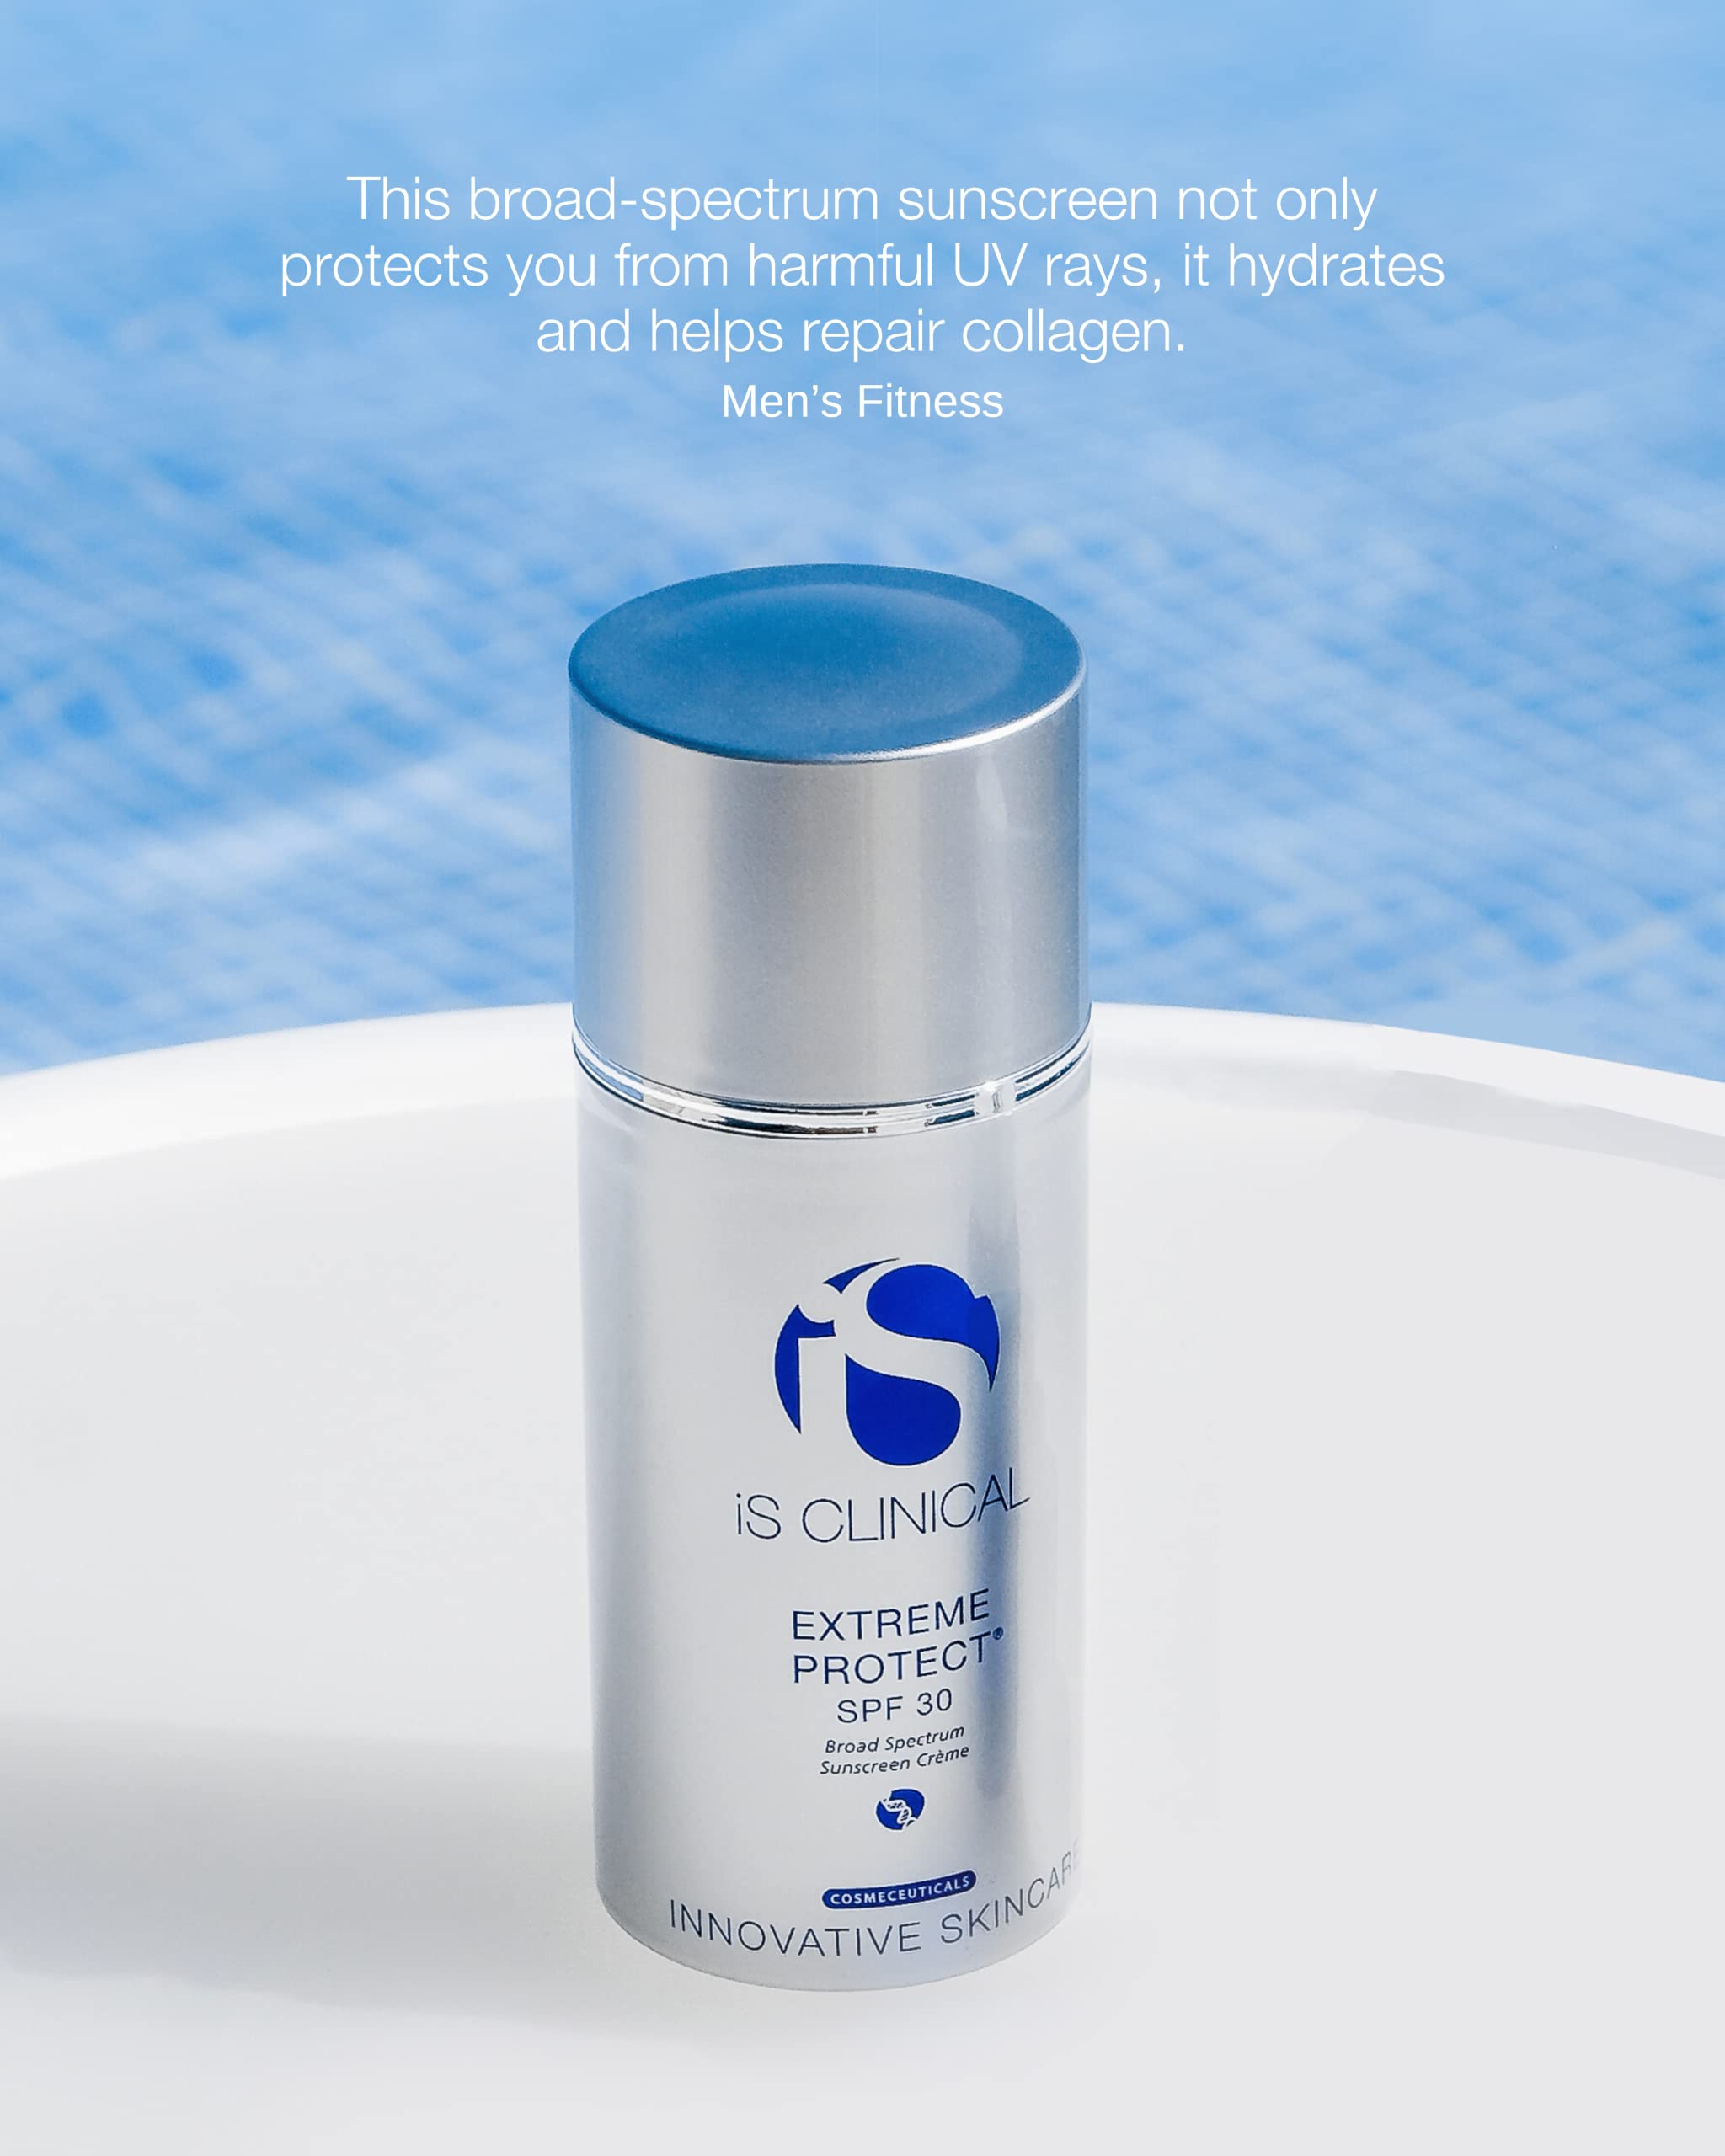 iS CLINICAL Extreme Protect SPF 30 Sunscreen, Everyday Moisturizer with SPF, Hydrating Treatment Sunscreen